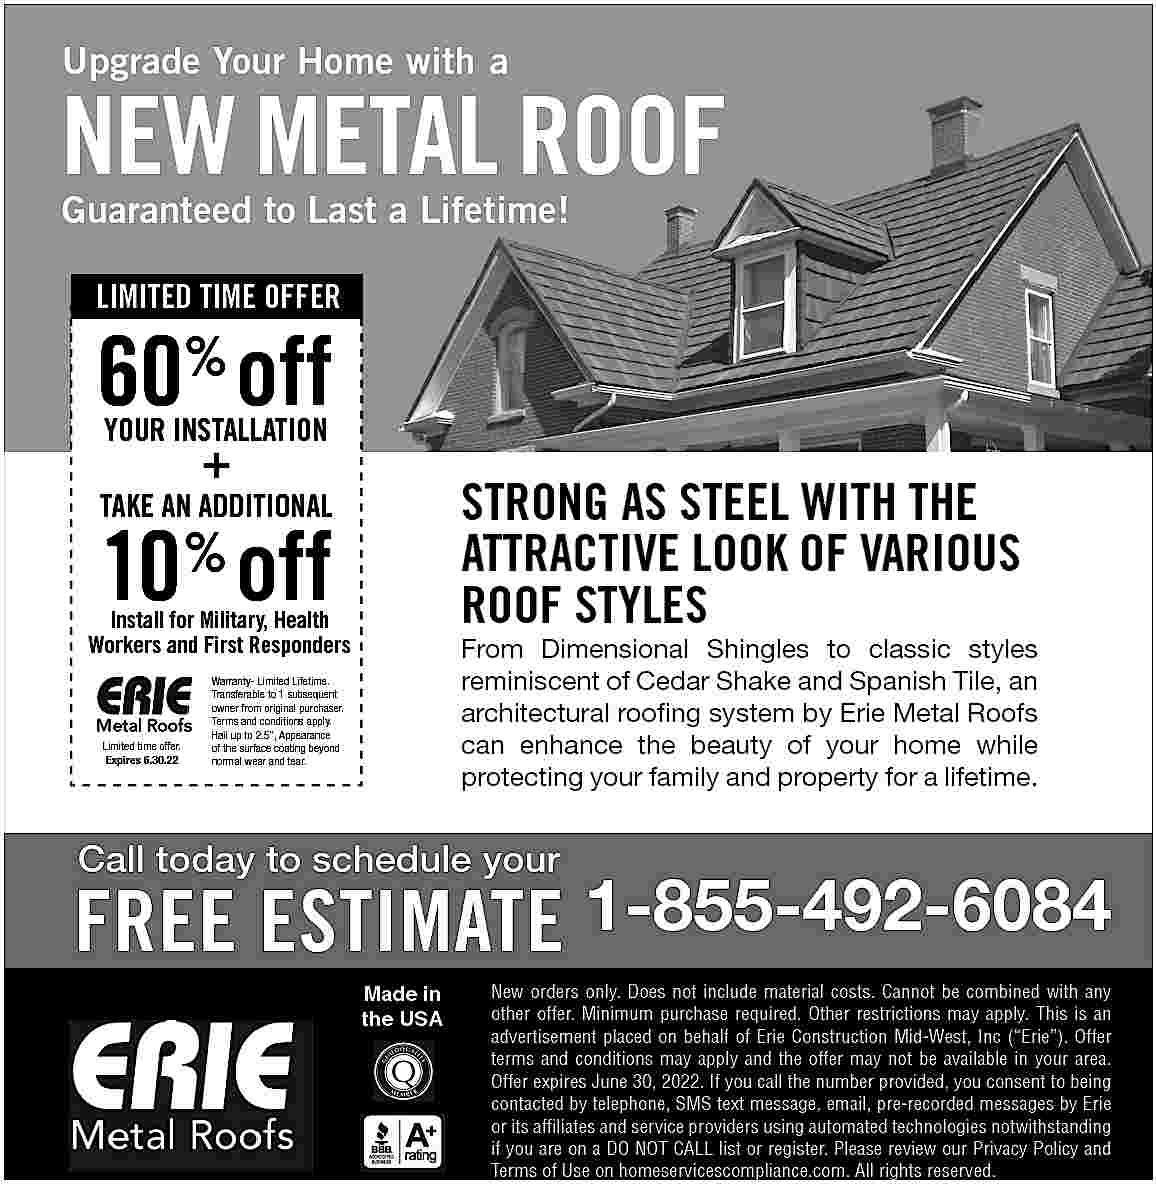 Upgrade Your Home with a  Upgrade Your Home with a    NEW METAL ROOF  Guaranteed to Last a Lifetime!  LIMITED TIME OFFER    60% off  YOUR INSTALLATION    +    STRONG AS STEEL WITH THE  ATTRACTIVE LOOK OF VARIOUS  ROOF STYLES    TAKE AN ADDITIONAL    10 off  %    Install for Military, Health  Workers and First Responders    Limited time offer.  Expires 6.30.22    From Dimensional Shingles to classic styles  reminiscent of Cedar Shake and Spanish Tile, an  architectural roofing system by Erie Metal Roofs  can enhance the beauty of your home while  protecting your family and property for a lifetime.    Warranty- Limited Lifetime.  Transferable to 1 subsequent  owner from original purchaser.  Terms and conditions apply.  Hail up to 2.5   , Appearance  of the surface coating beyond  normal wear and tear.    Call today to schedule your    FREE ESTIMATE 1-855-492-6084  Made in  the USA    New orders only. Does not include material costs. Cannot be combined with any  other offer. Minimum purchase required. Other restrictions may apply. This is an  advertisement placed on behalf of Erie Construction Mid-West, Inc (   Erie   ). Offer  terms and conditions may apply and the offer may not be available in your area.  Offer expires June 30, 2022. If you call the number provided, you consent to being  contacted by telephone, SMS text message, email, pre-recorded messages by Erie  or its affiliates and service providers using automated technologies notwithstanding  if you are on a DO NOT CALL list or register. Please review our Privacy Policy and  Terms of Use on homeservicescompliance.com. All rights reserved.     